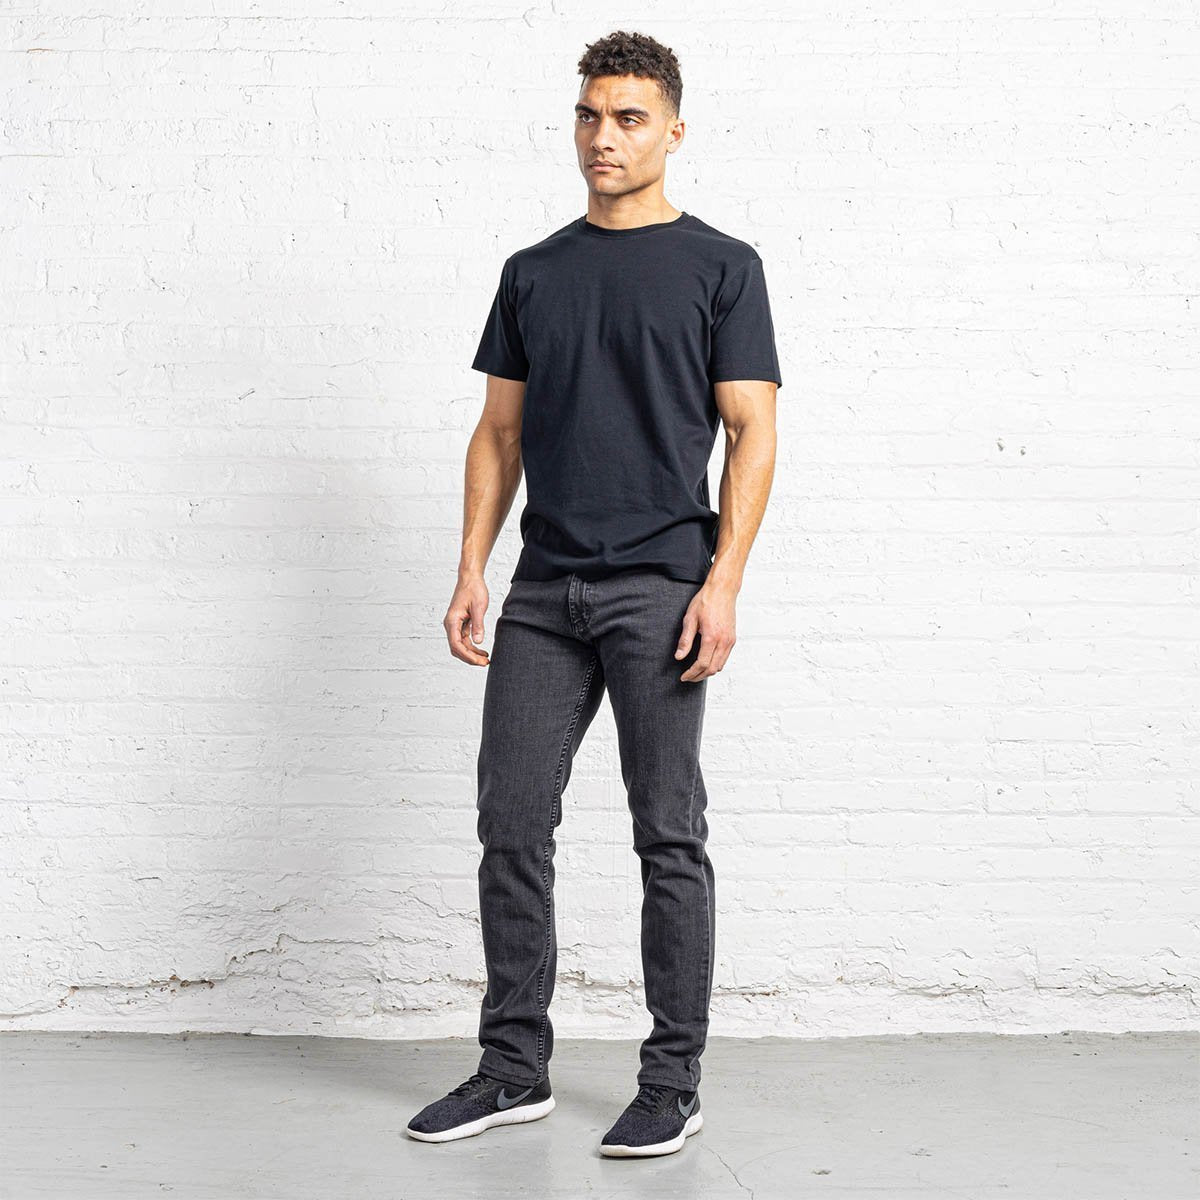 9 Ways to Wear Black Jeans (for Guys) - The Modest Man